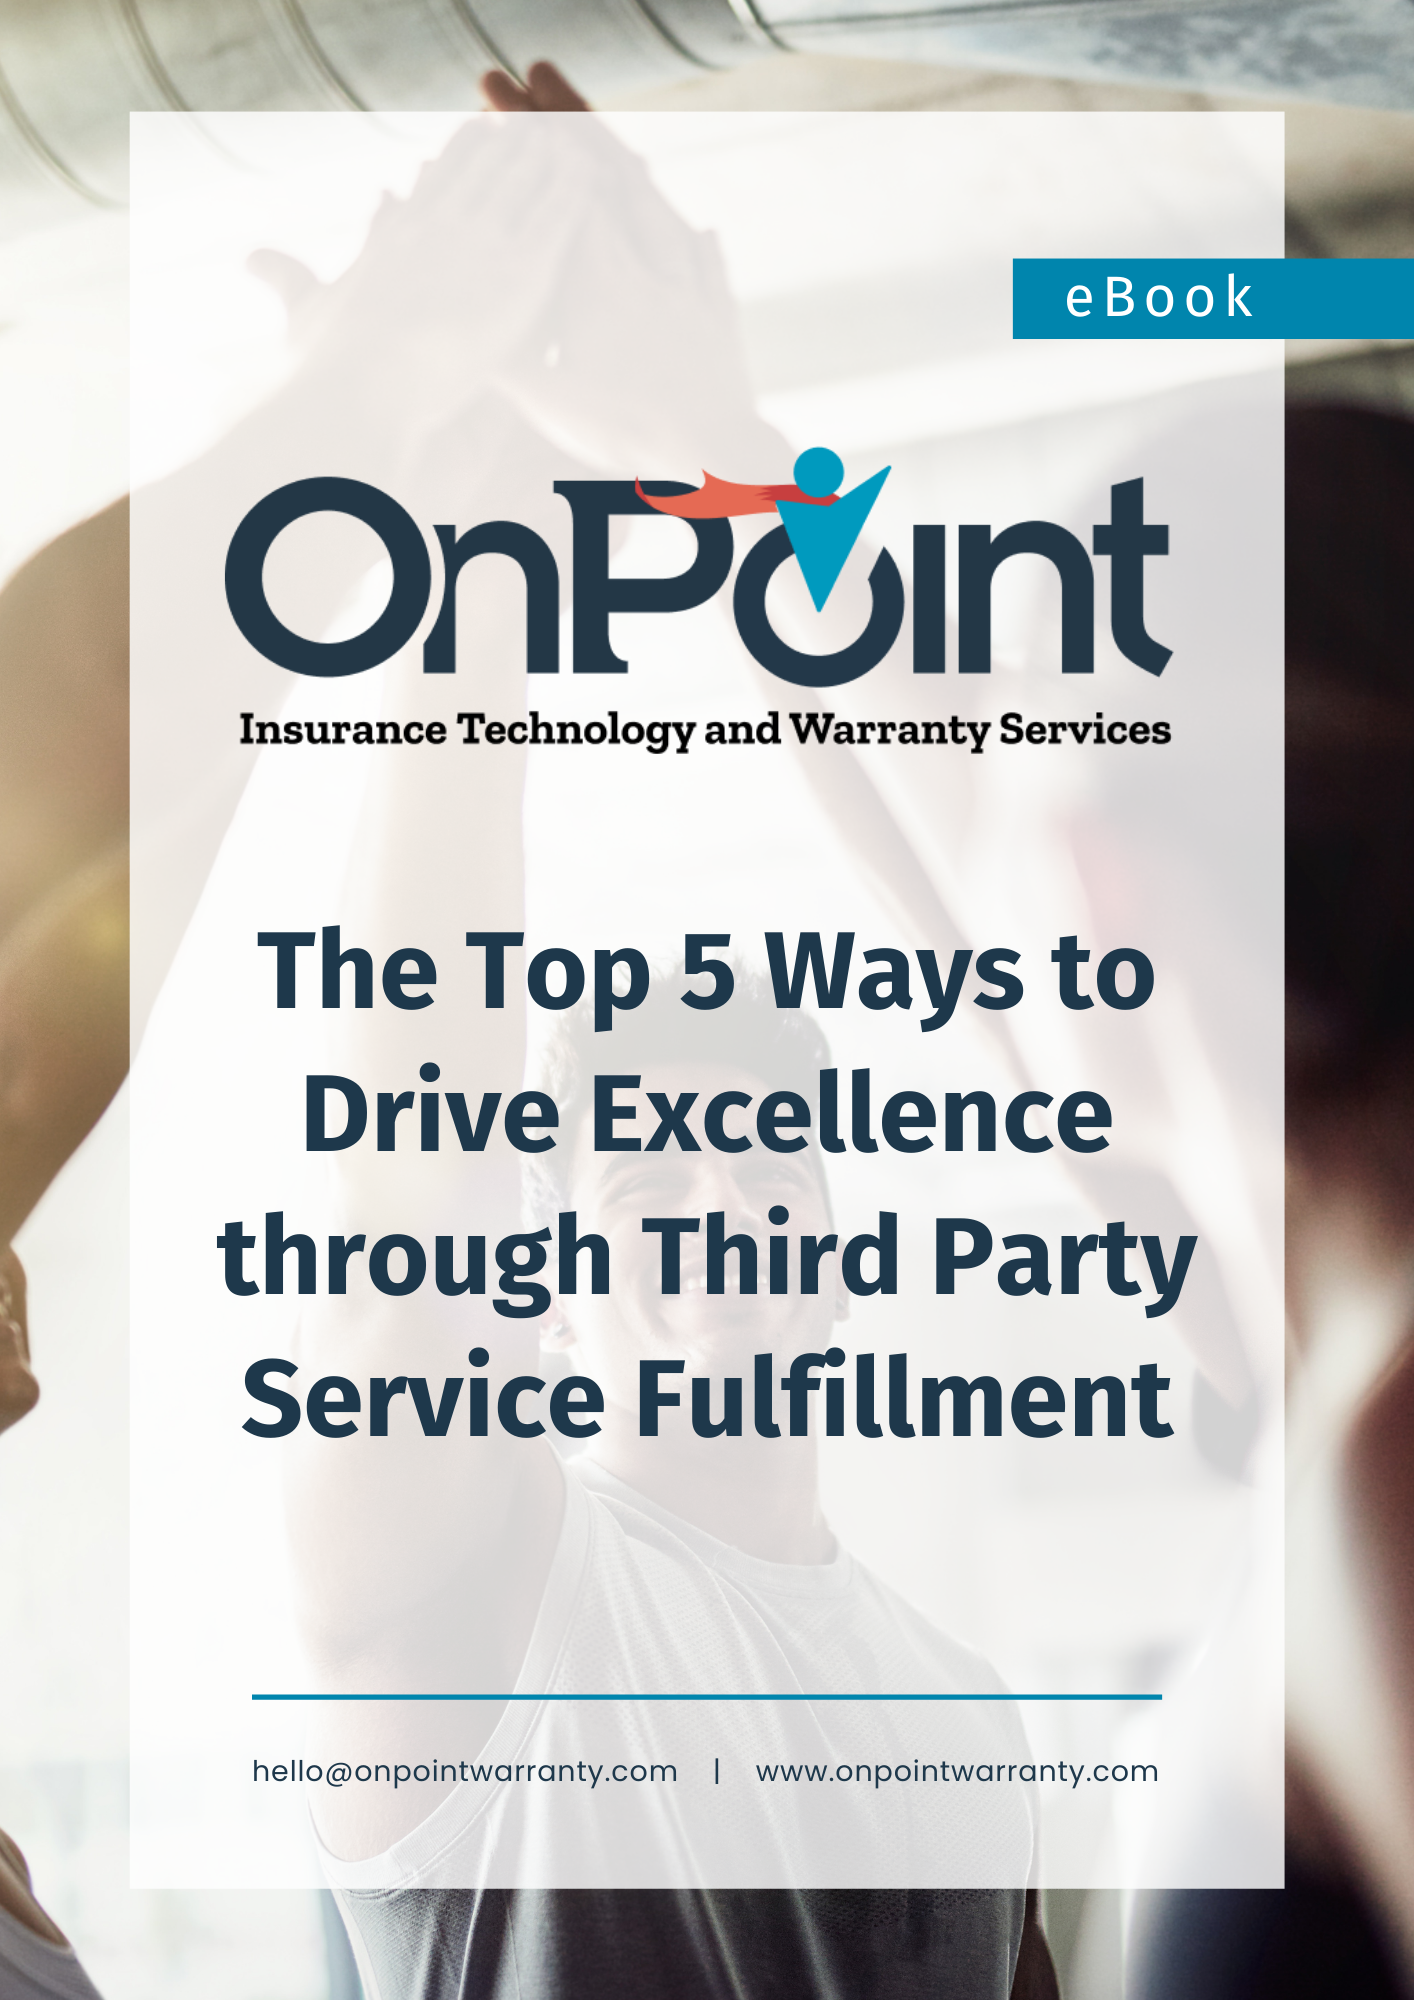 White Paper The Top 5 Ways to Drive Excellence through Third Party Service Fulfillment